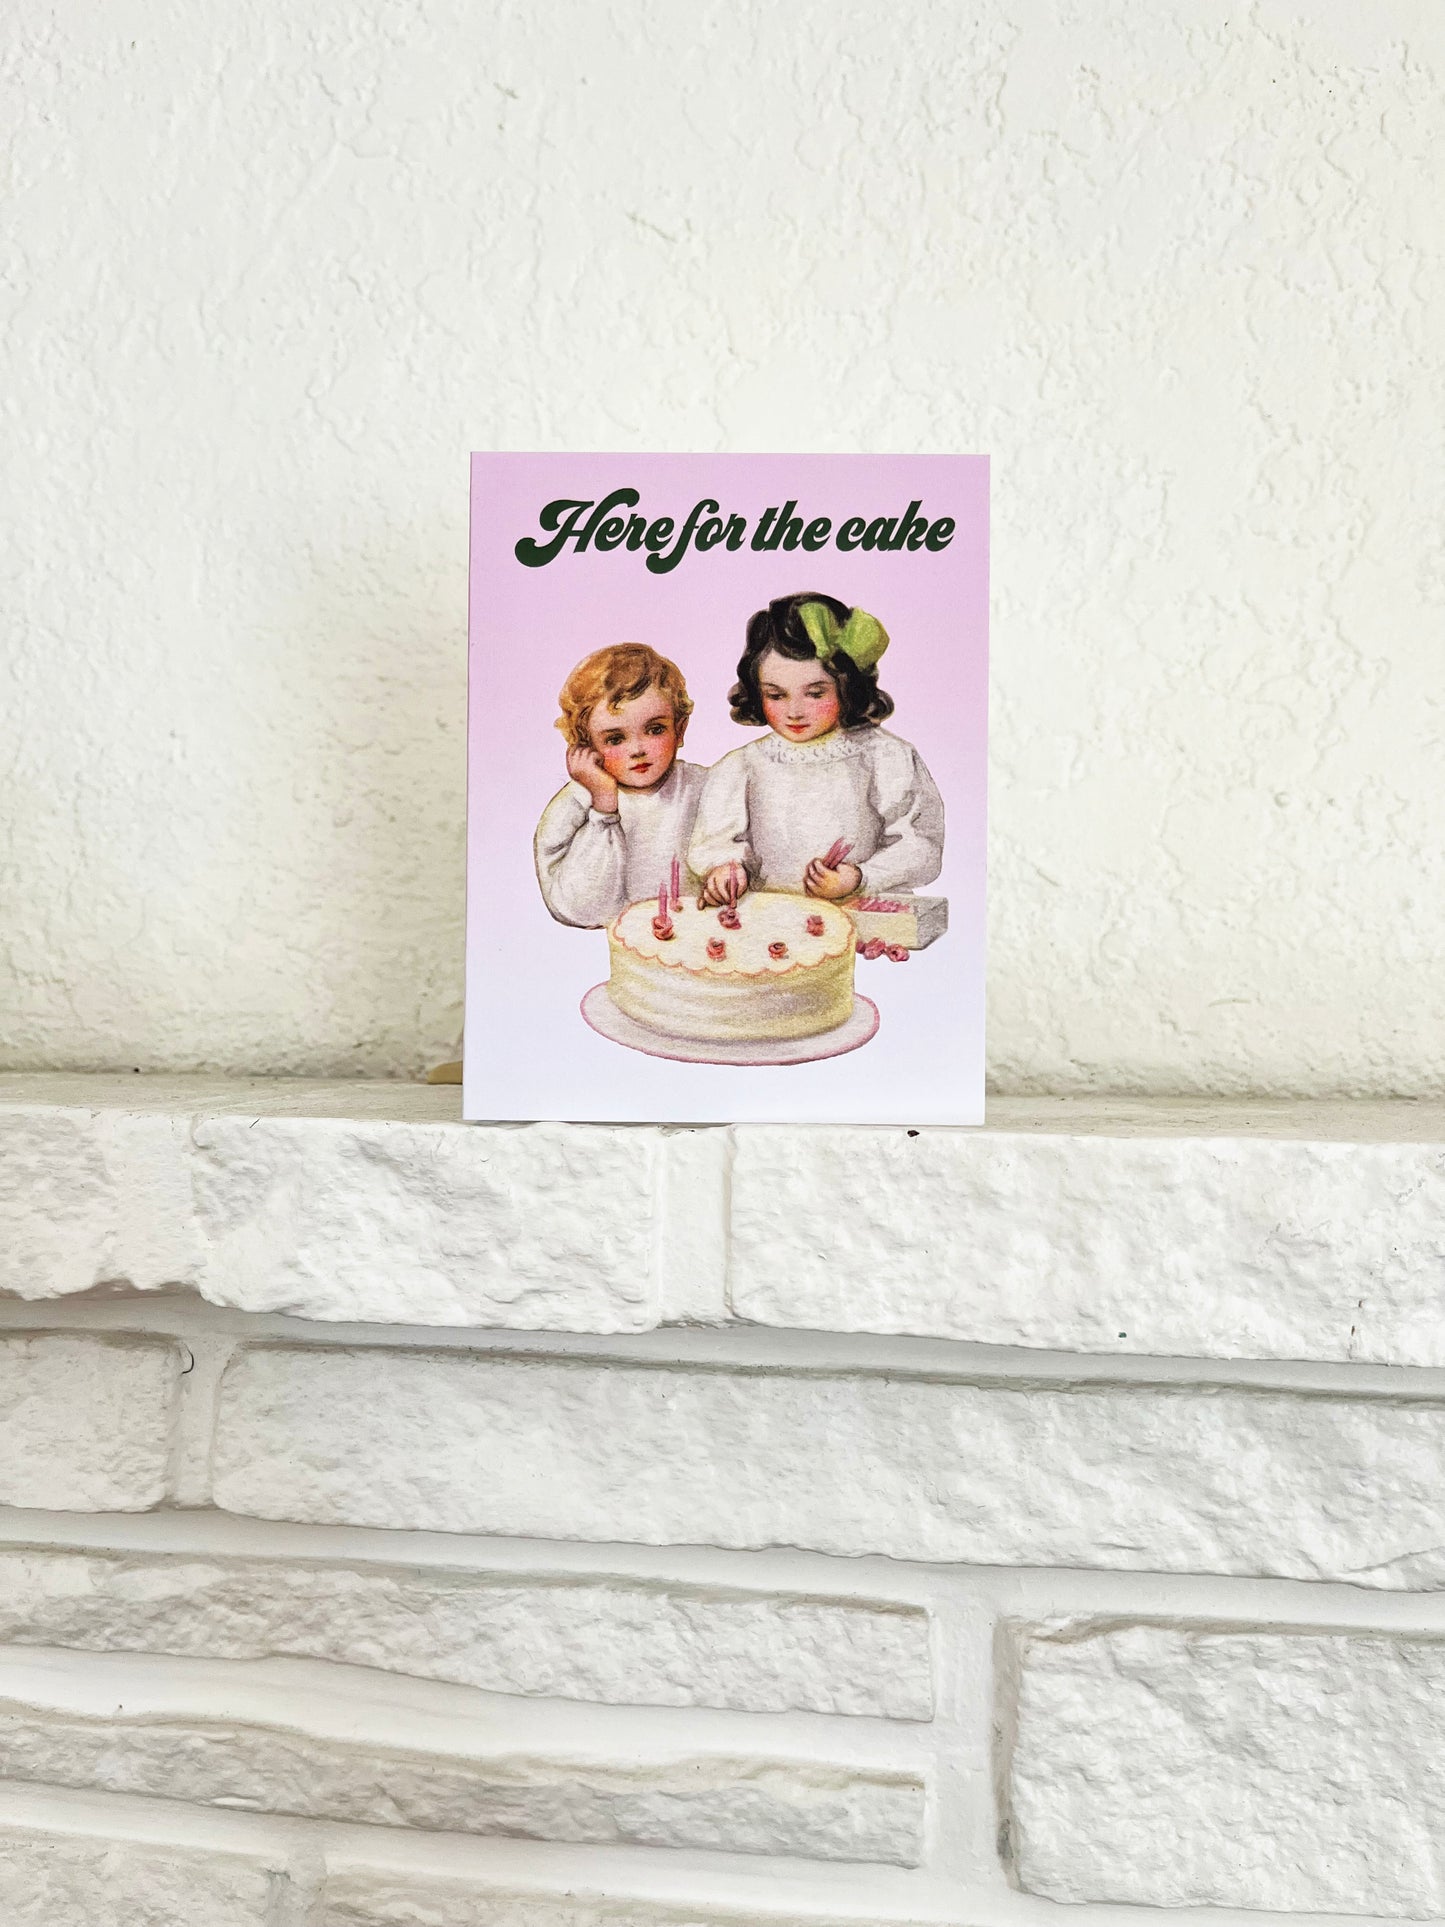 vintage style kitsch kids children with cake here for the cake card pastry dessert celebration congrats graduation funny fun celebrate birthday anniversary wedding coin laundry greeting card